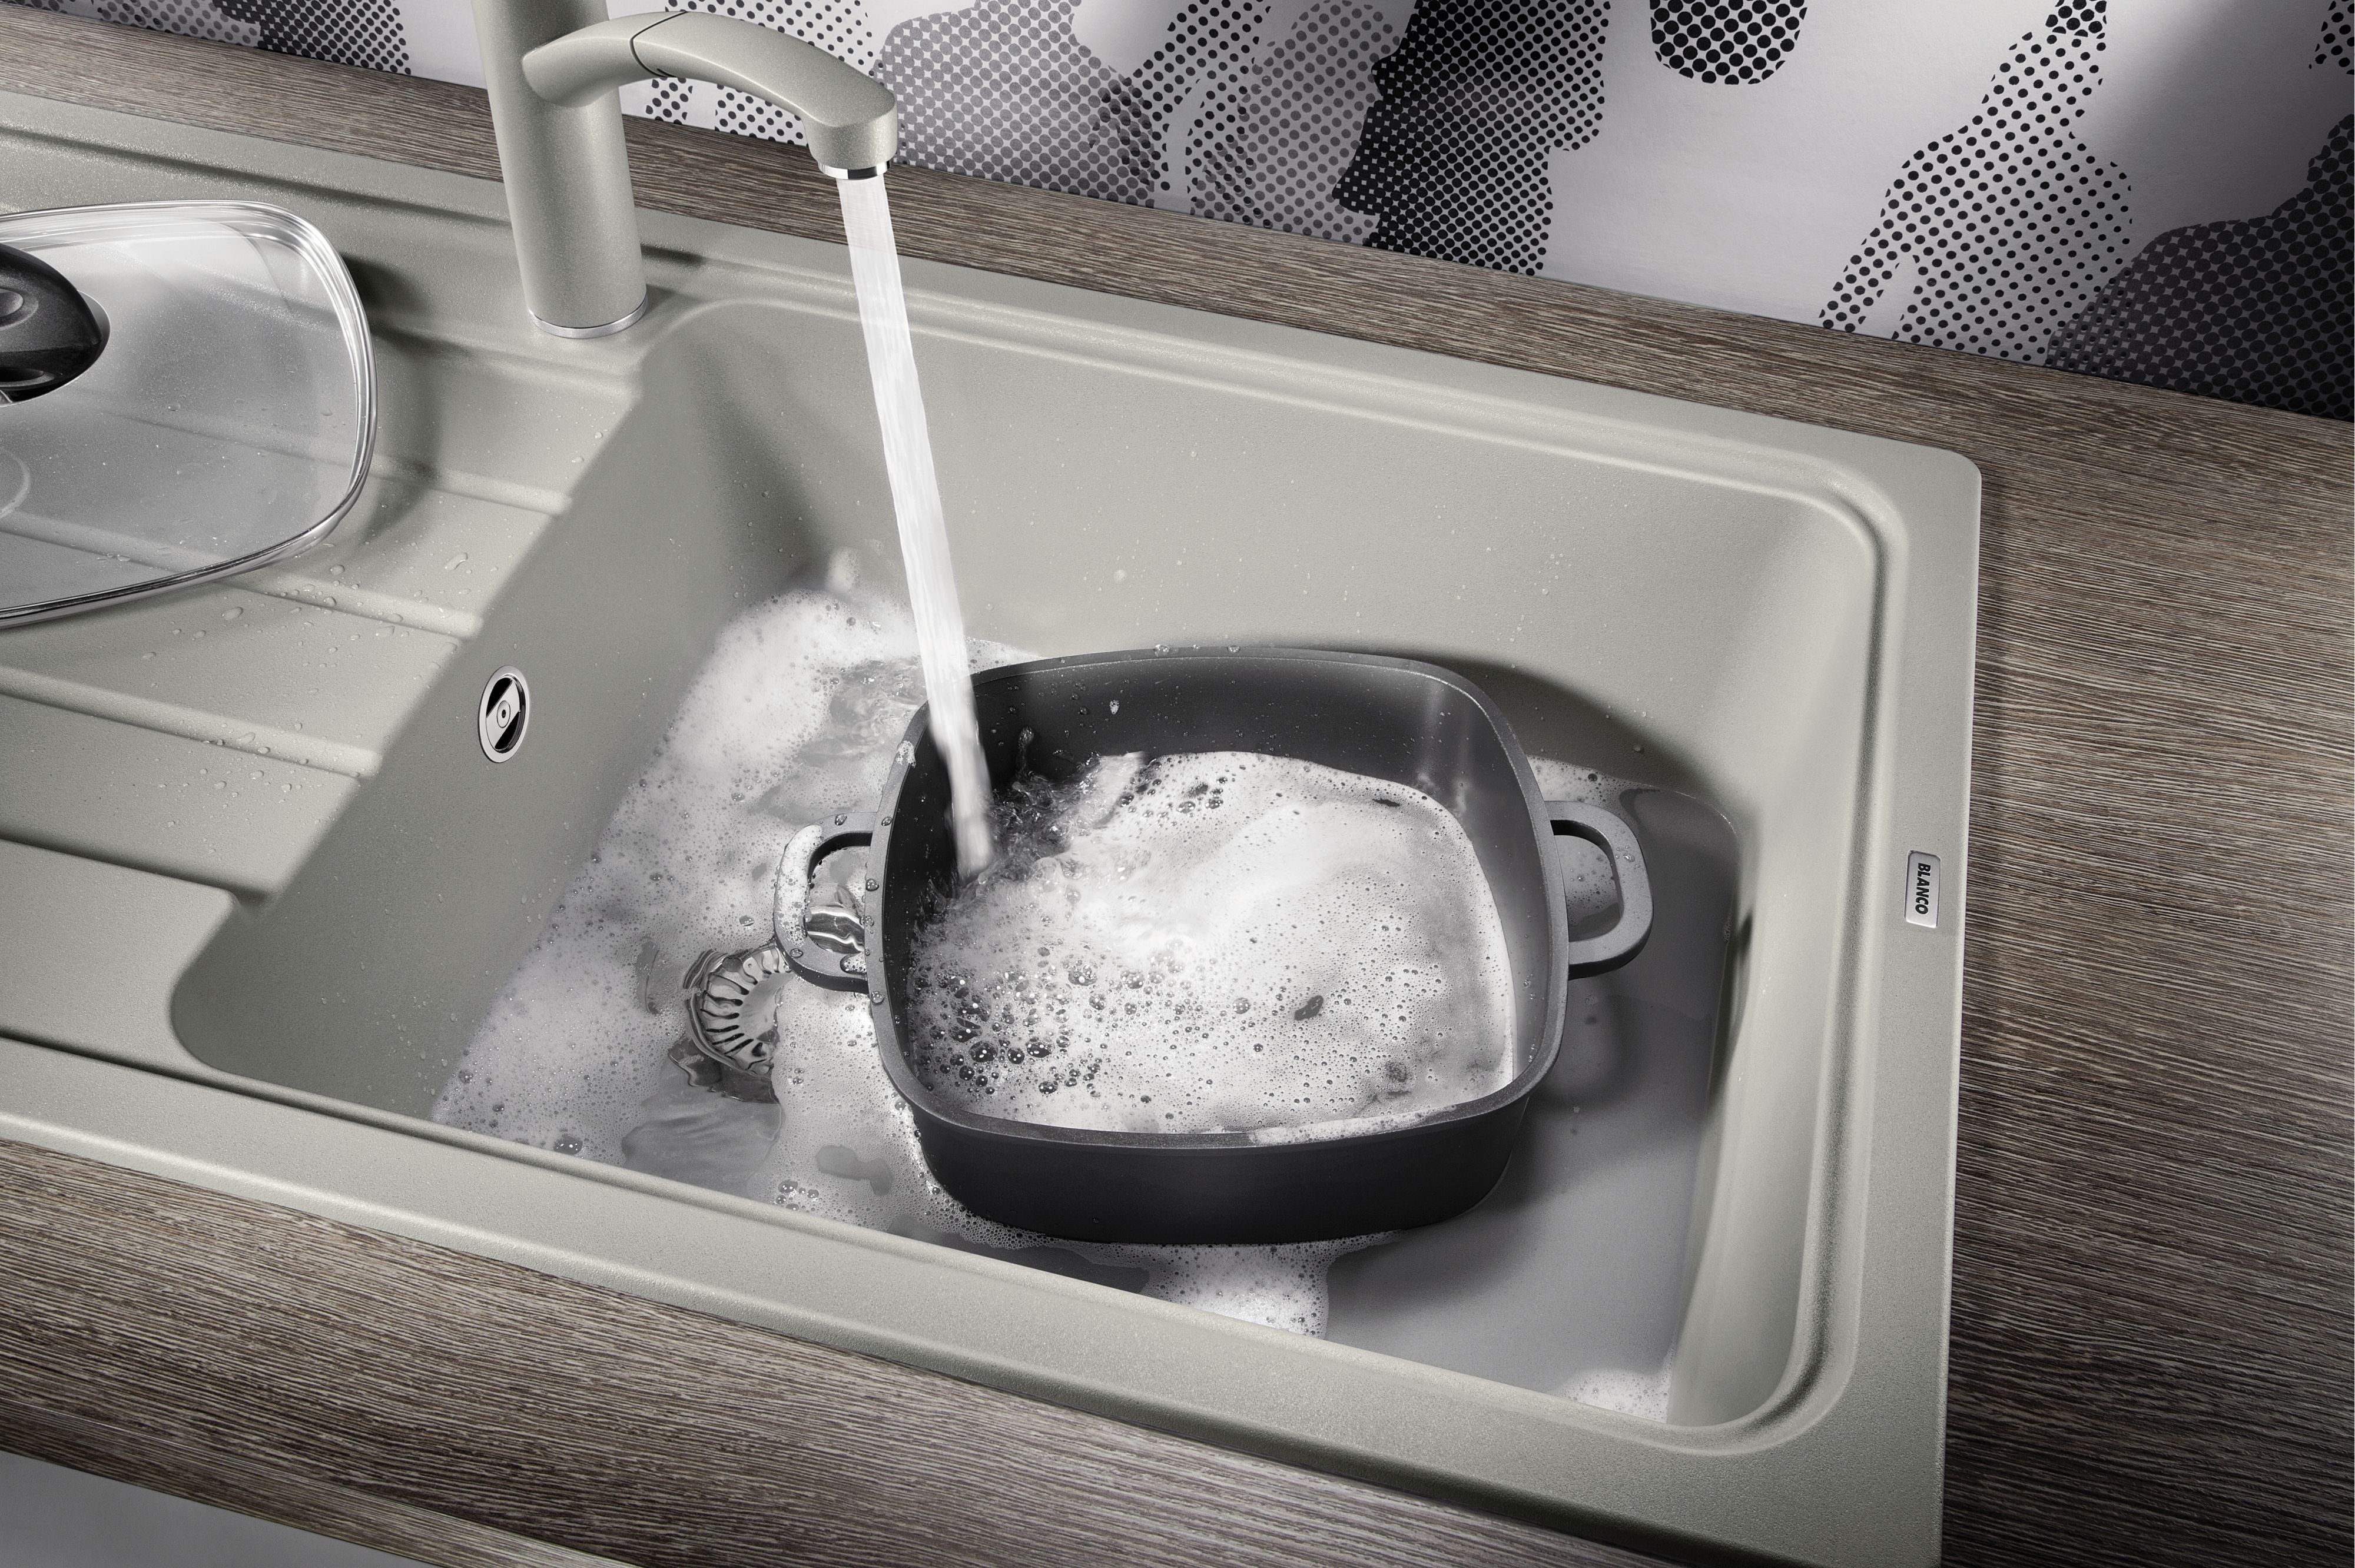 XXL sinks can also be used to wash large kitchenware like casserole dishes.